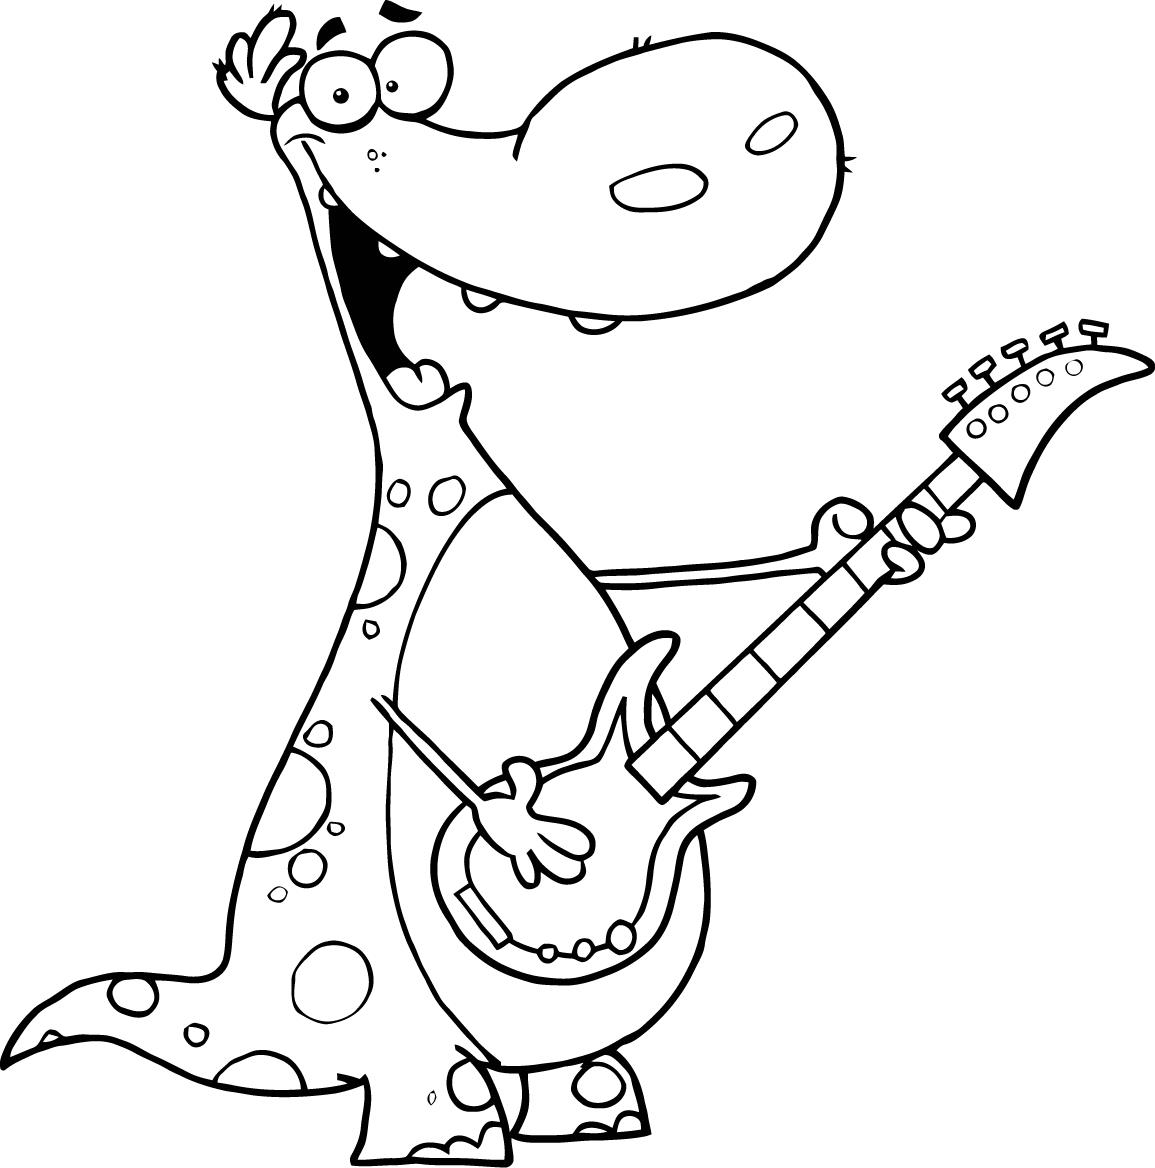 Dinosaur With Guitar Coloring Page